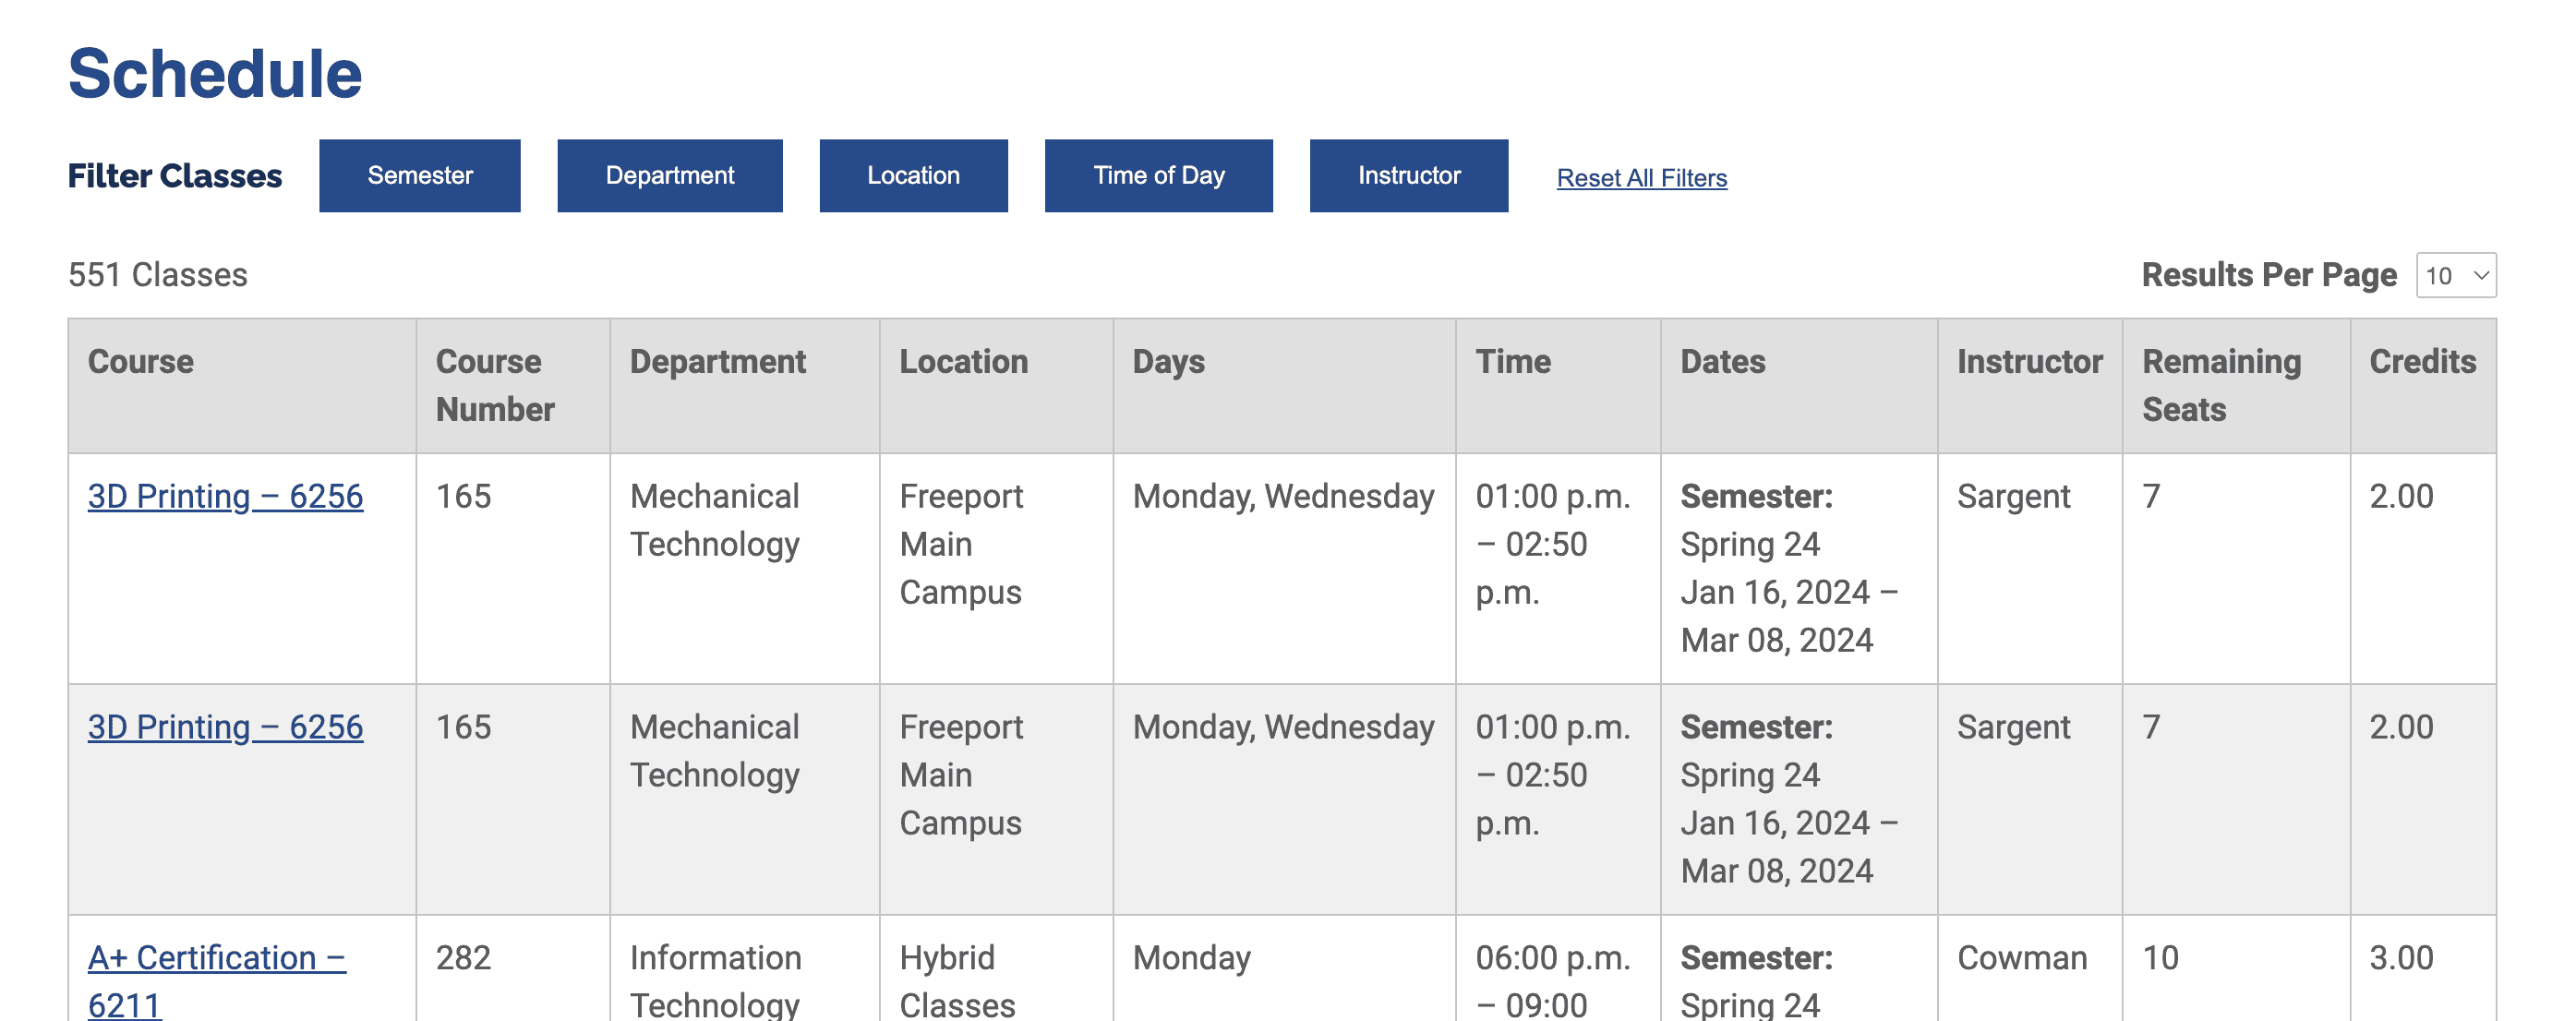 Screenshot of a Schedule on a website with buttons for filtering classes by semester, department, location, time of day, and instructor, followed by the text 551 Classes, and option to choose the results per page, and a table with 10 columns.